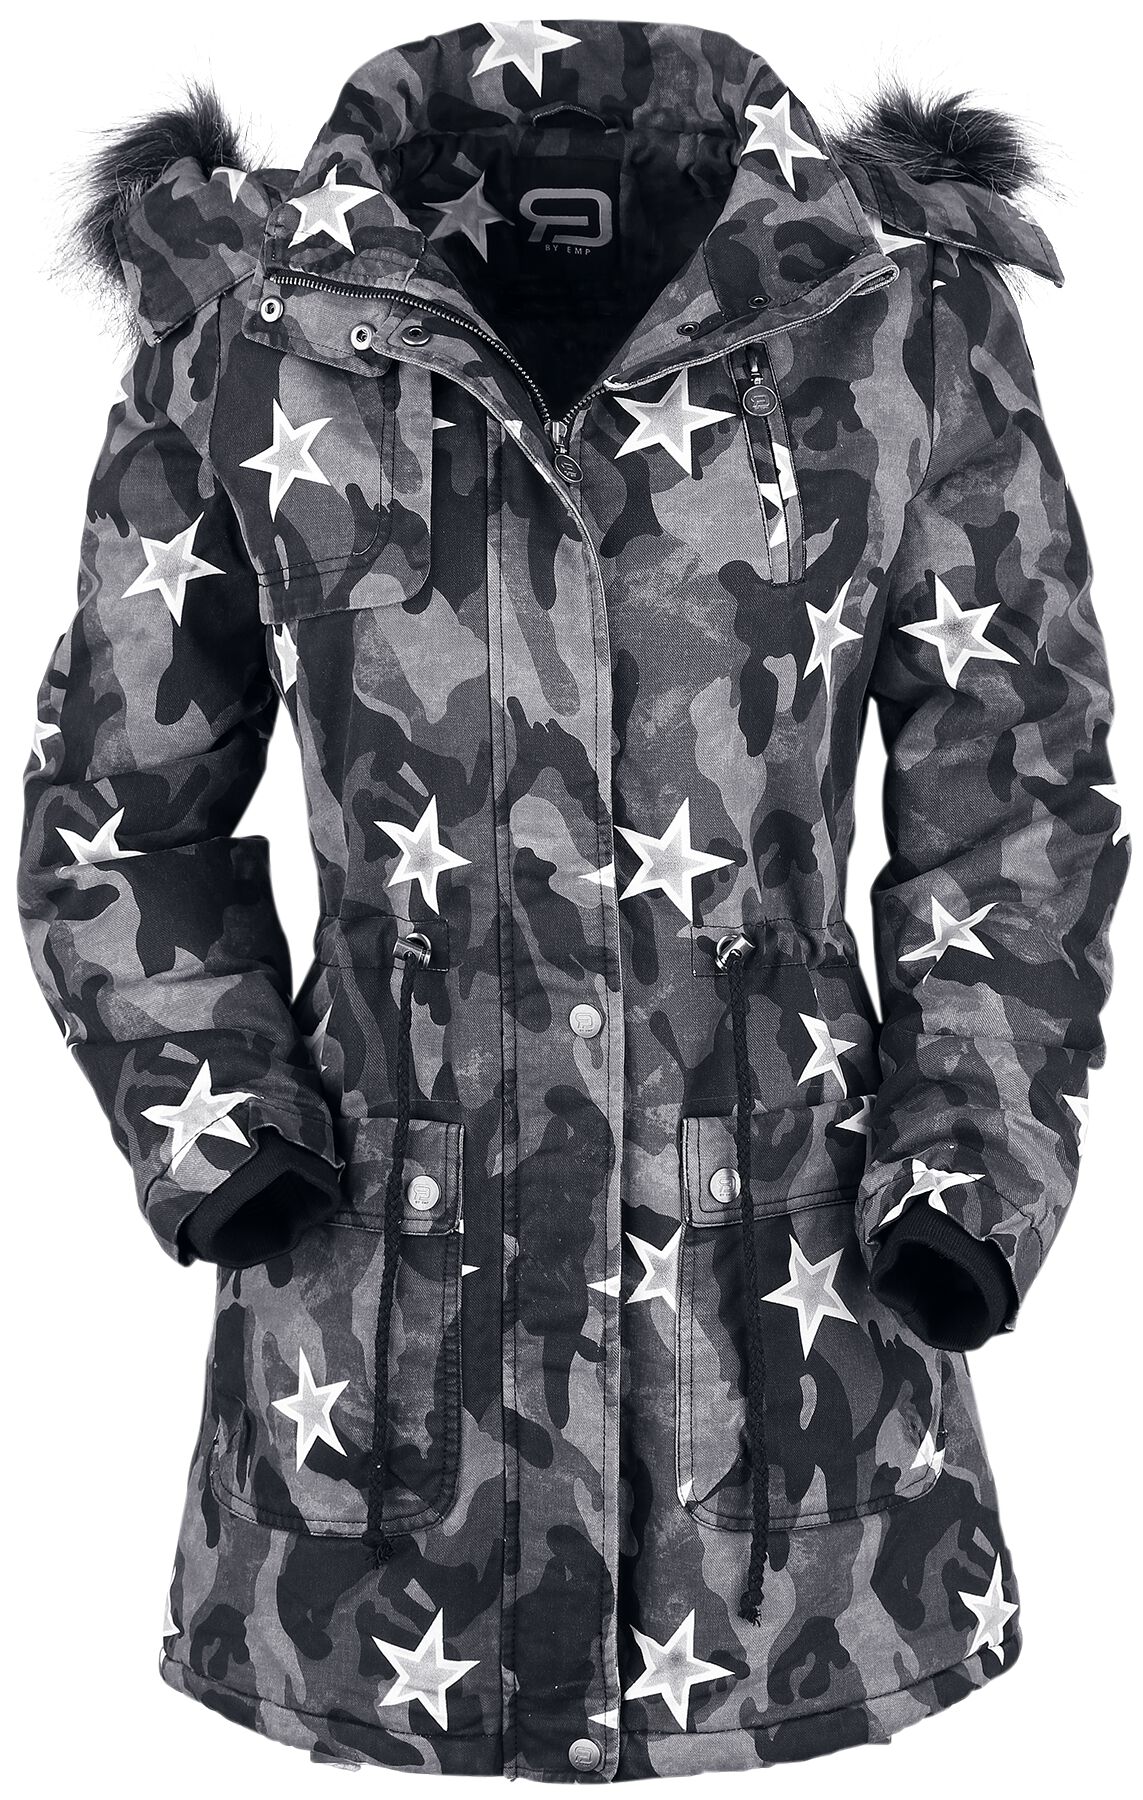 Image of Giacca invernale di RED by EMP - Ladies Parka - S a XXL - Donna - camouflage grigio